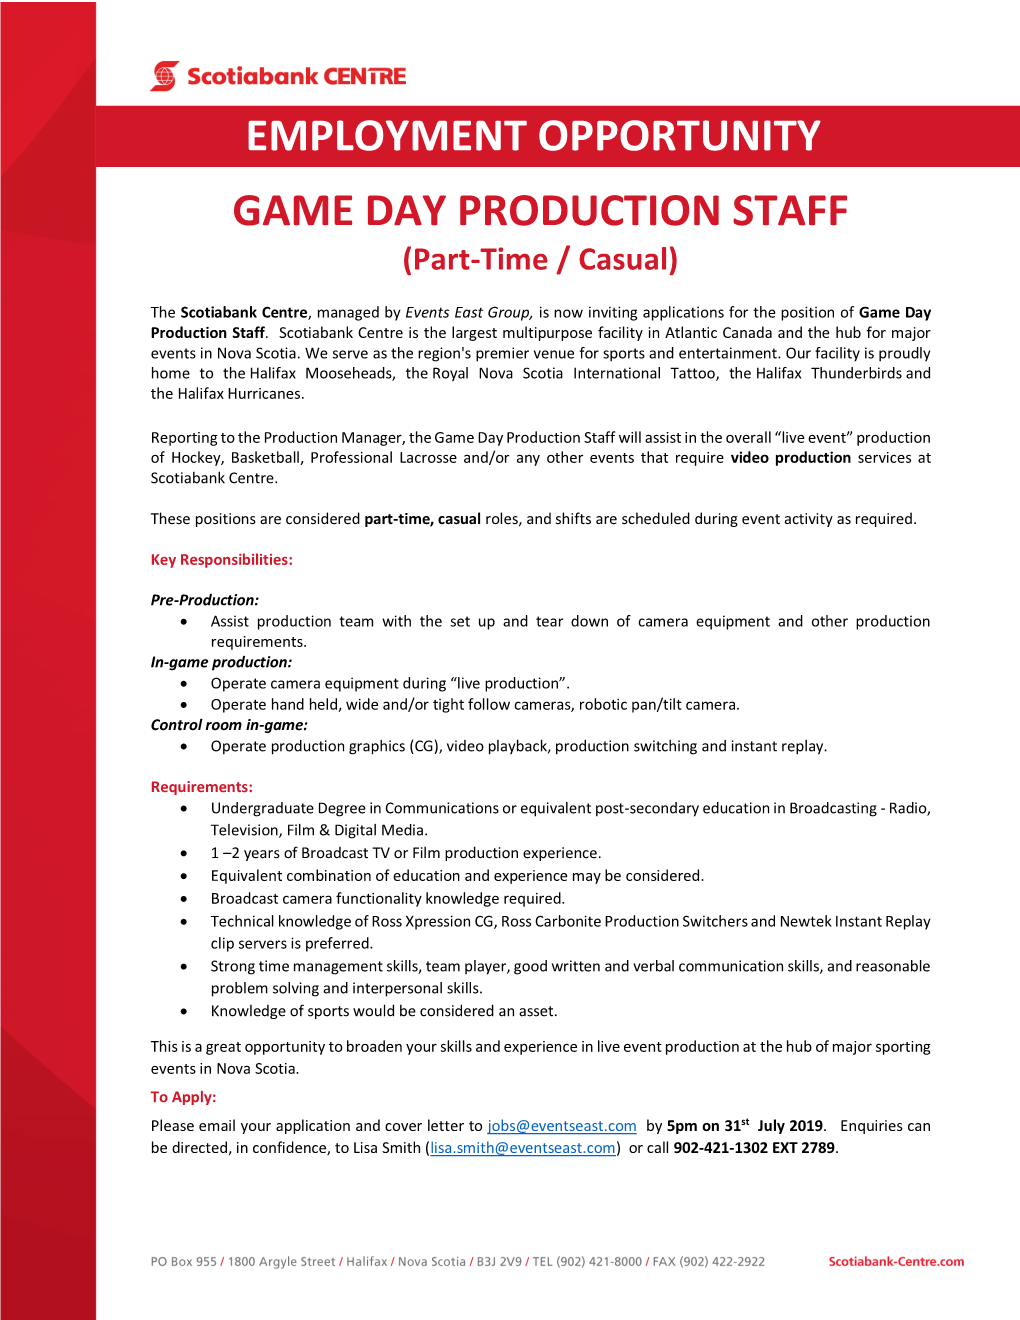 EMPLOYMENT OPPORTUNITY GAME DAY PRODUCTION STAFF (Part-Time / Casual)